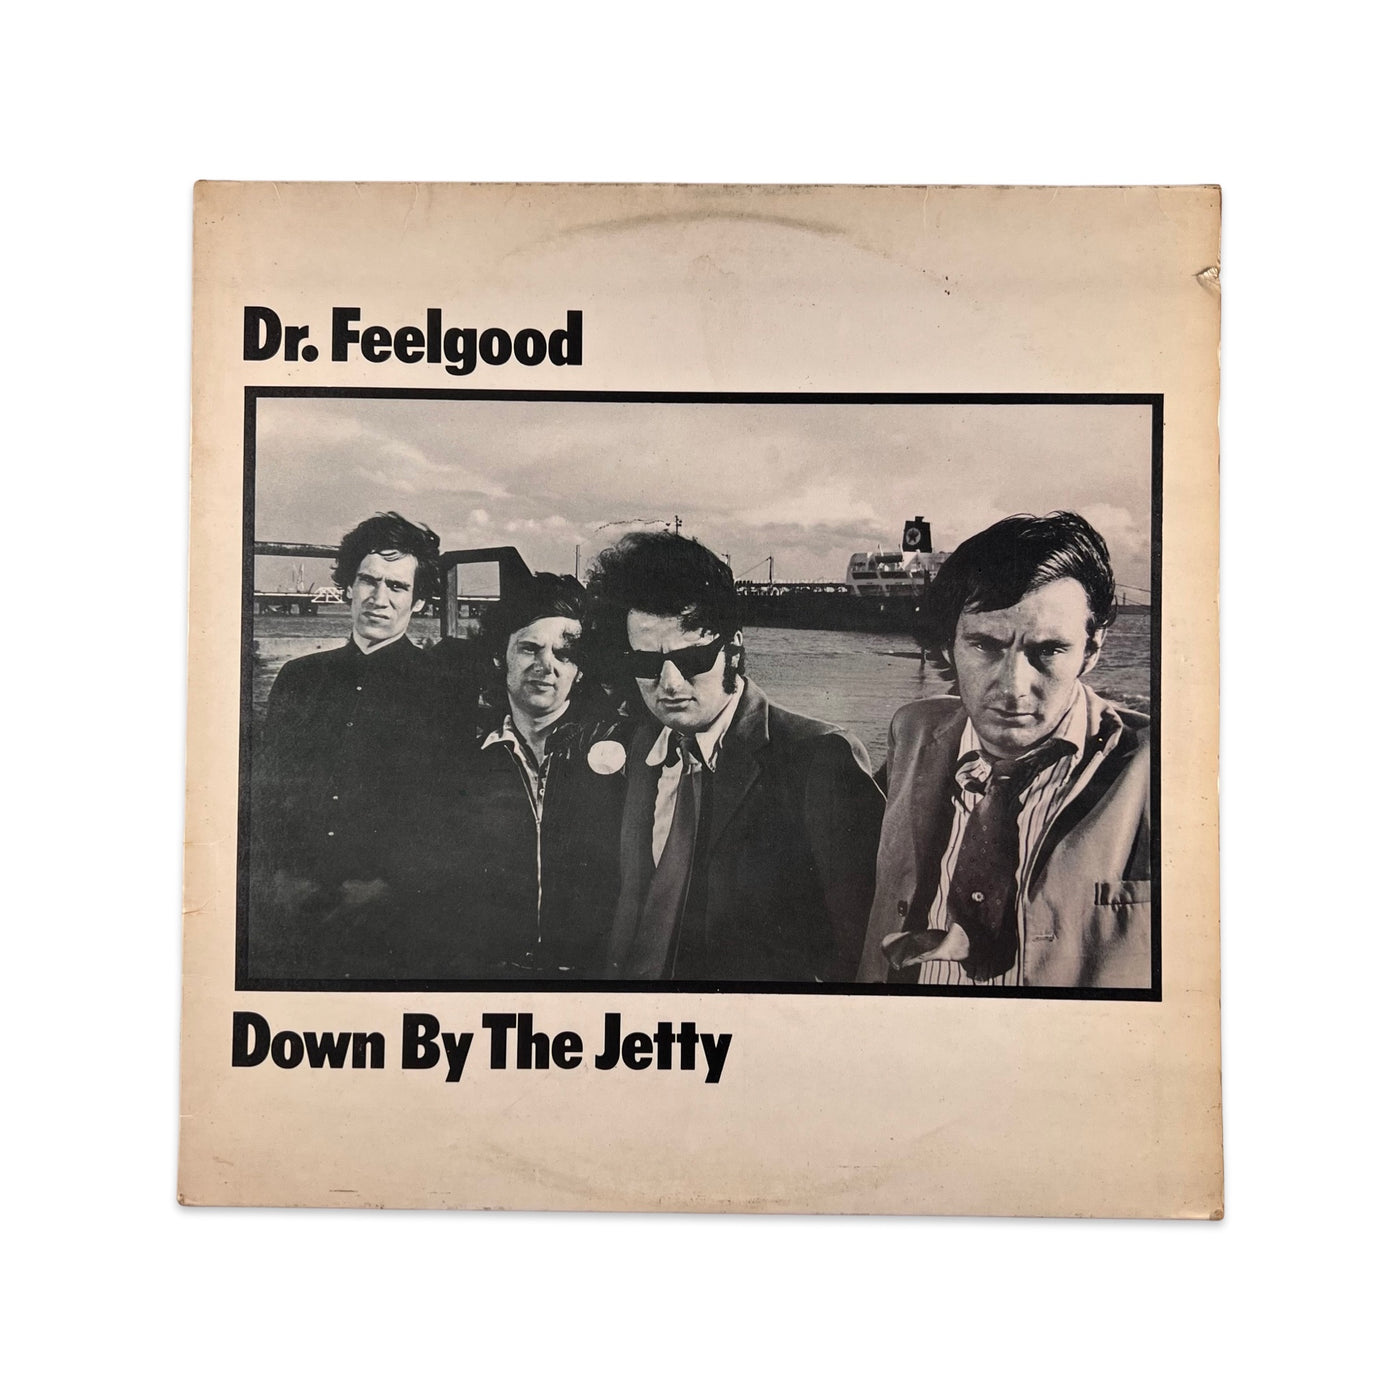 Dr. Feelgood - Down By The Jetty - Mono